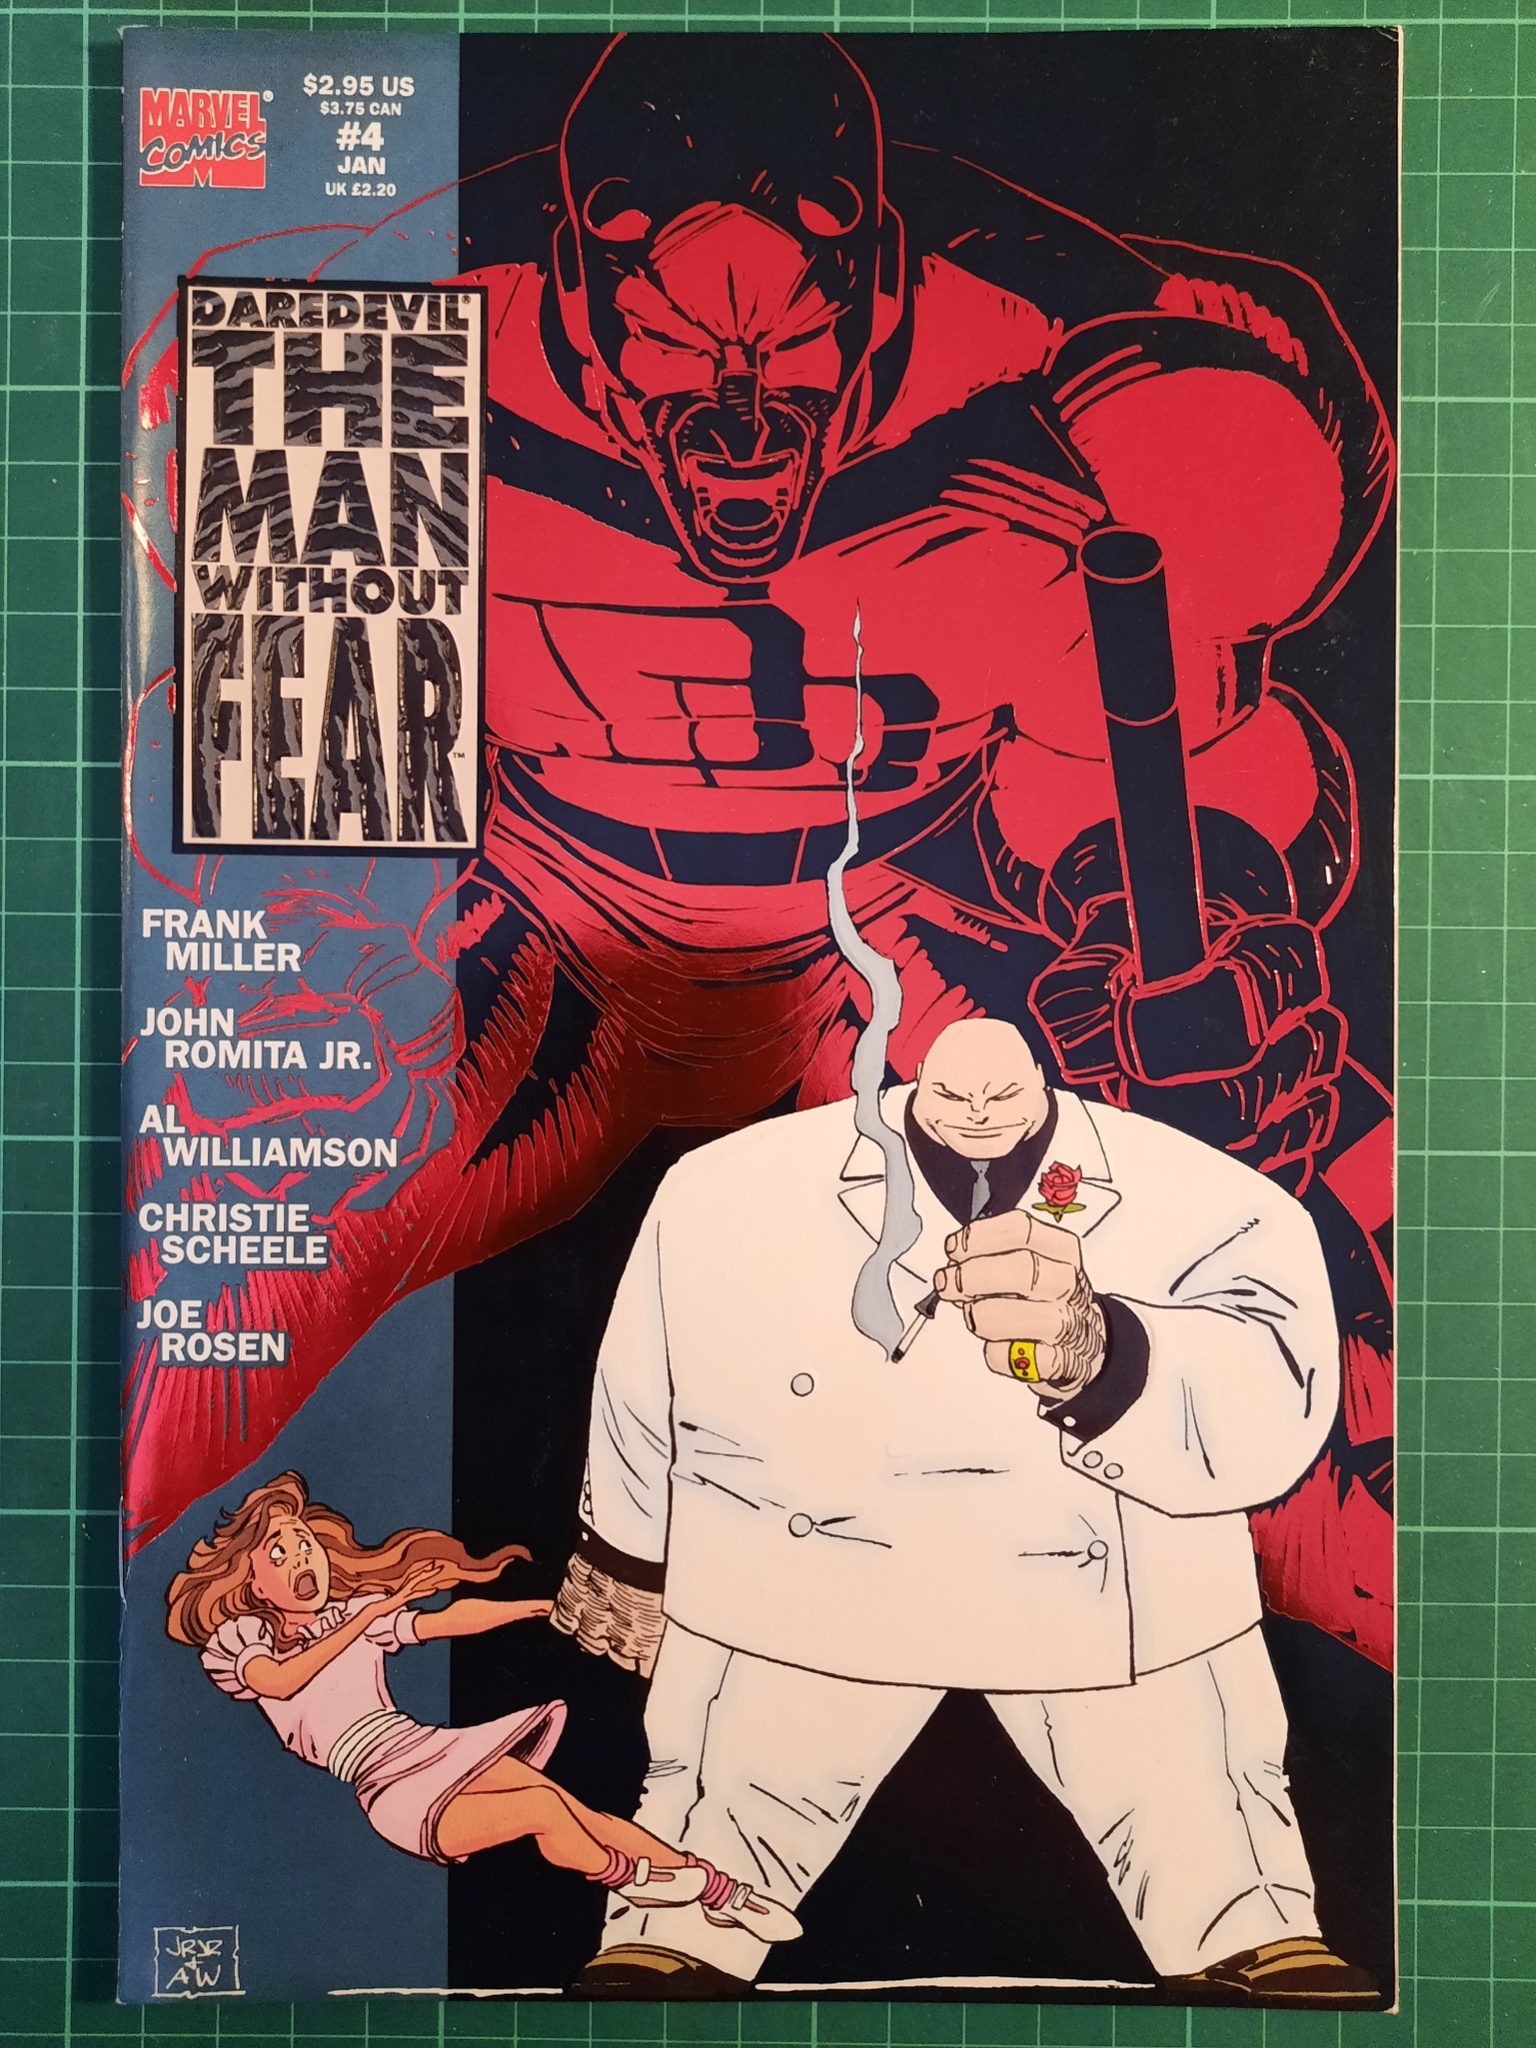 Daredevil : The man without fear #4